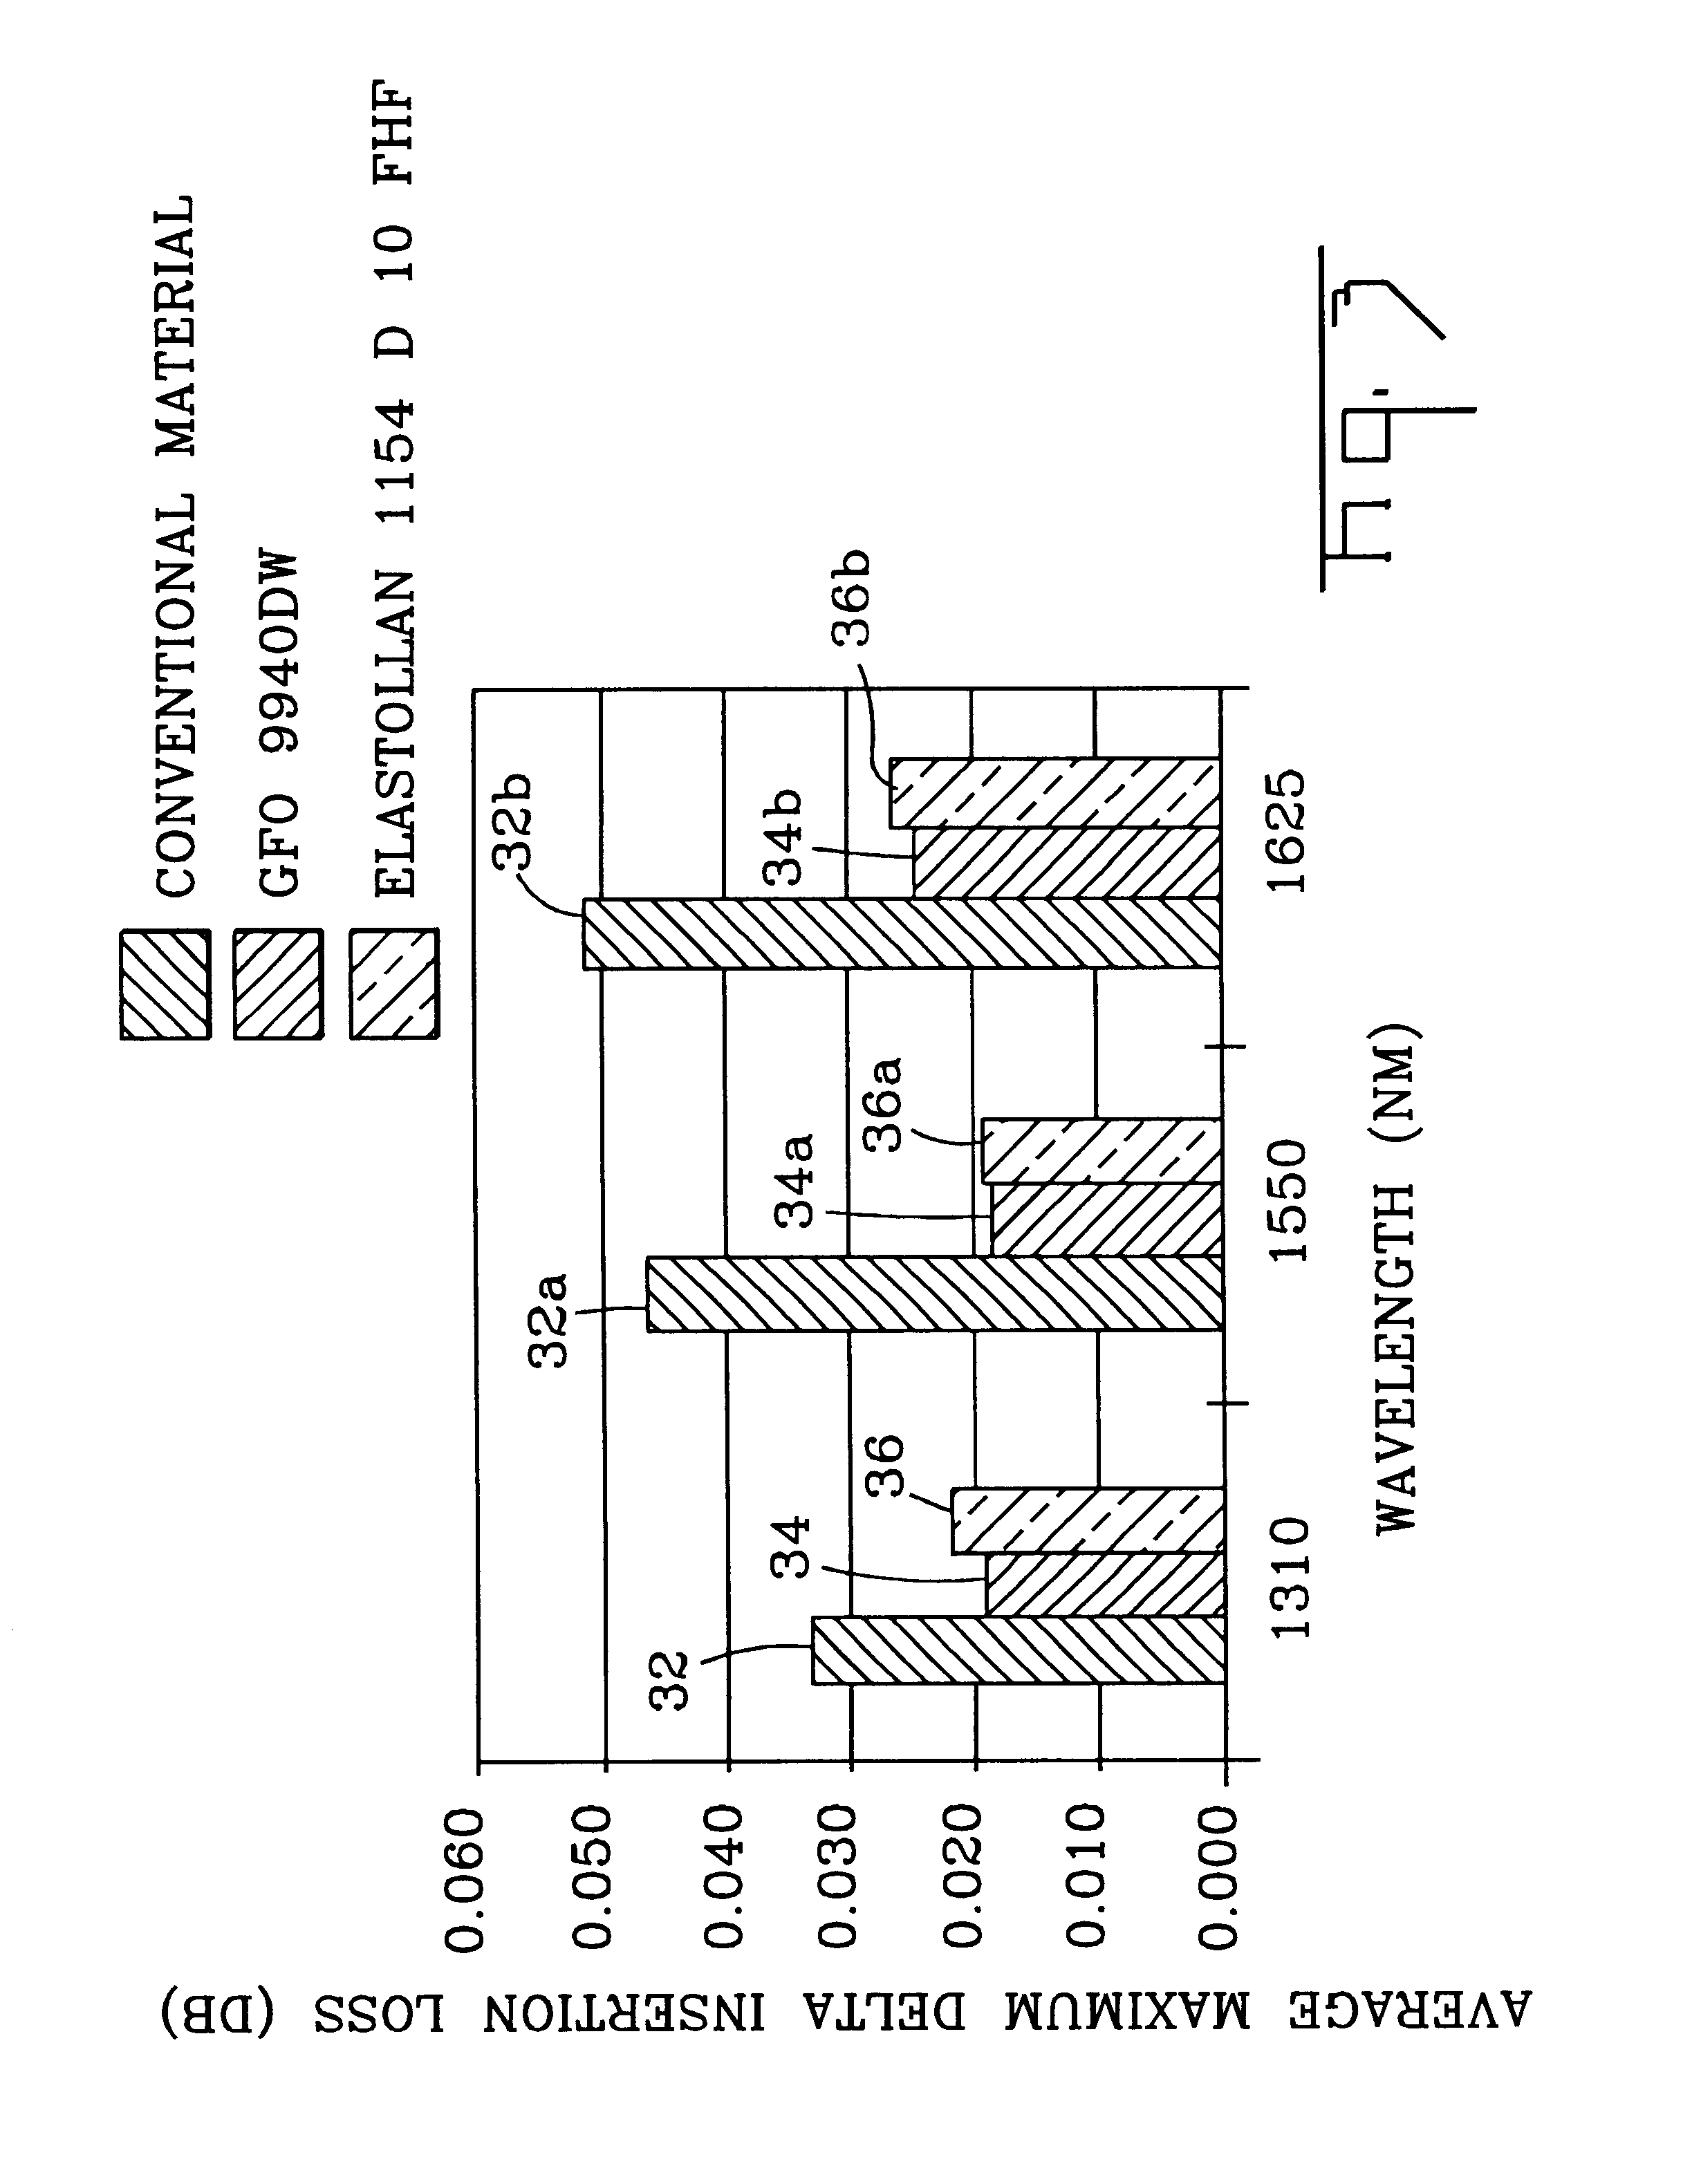 Optical fiber having a low-shrink buffer layer and methods of manufacturing the same